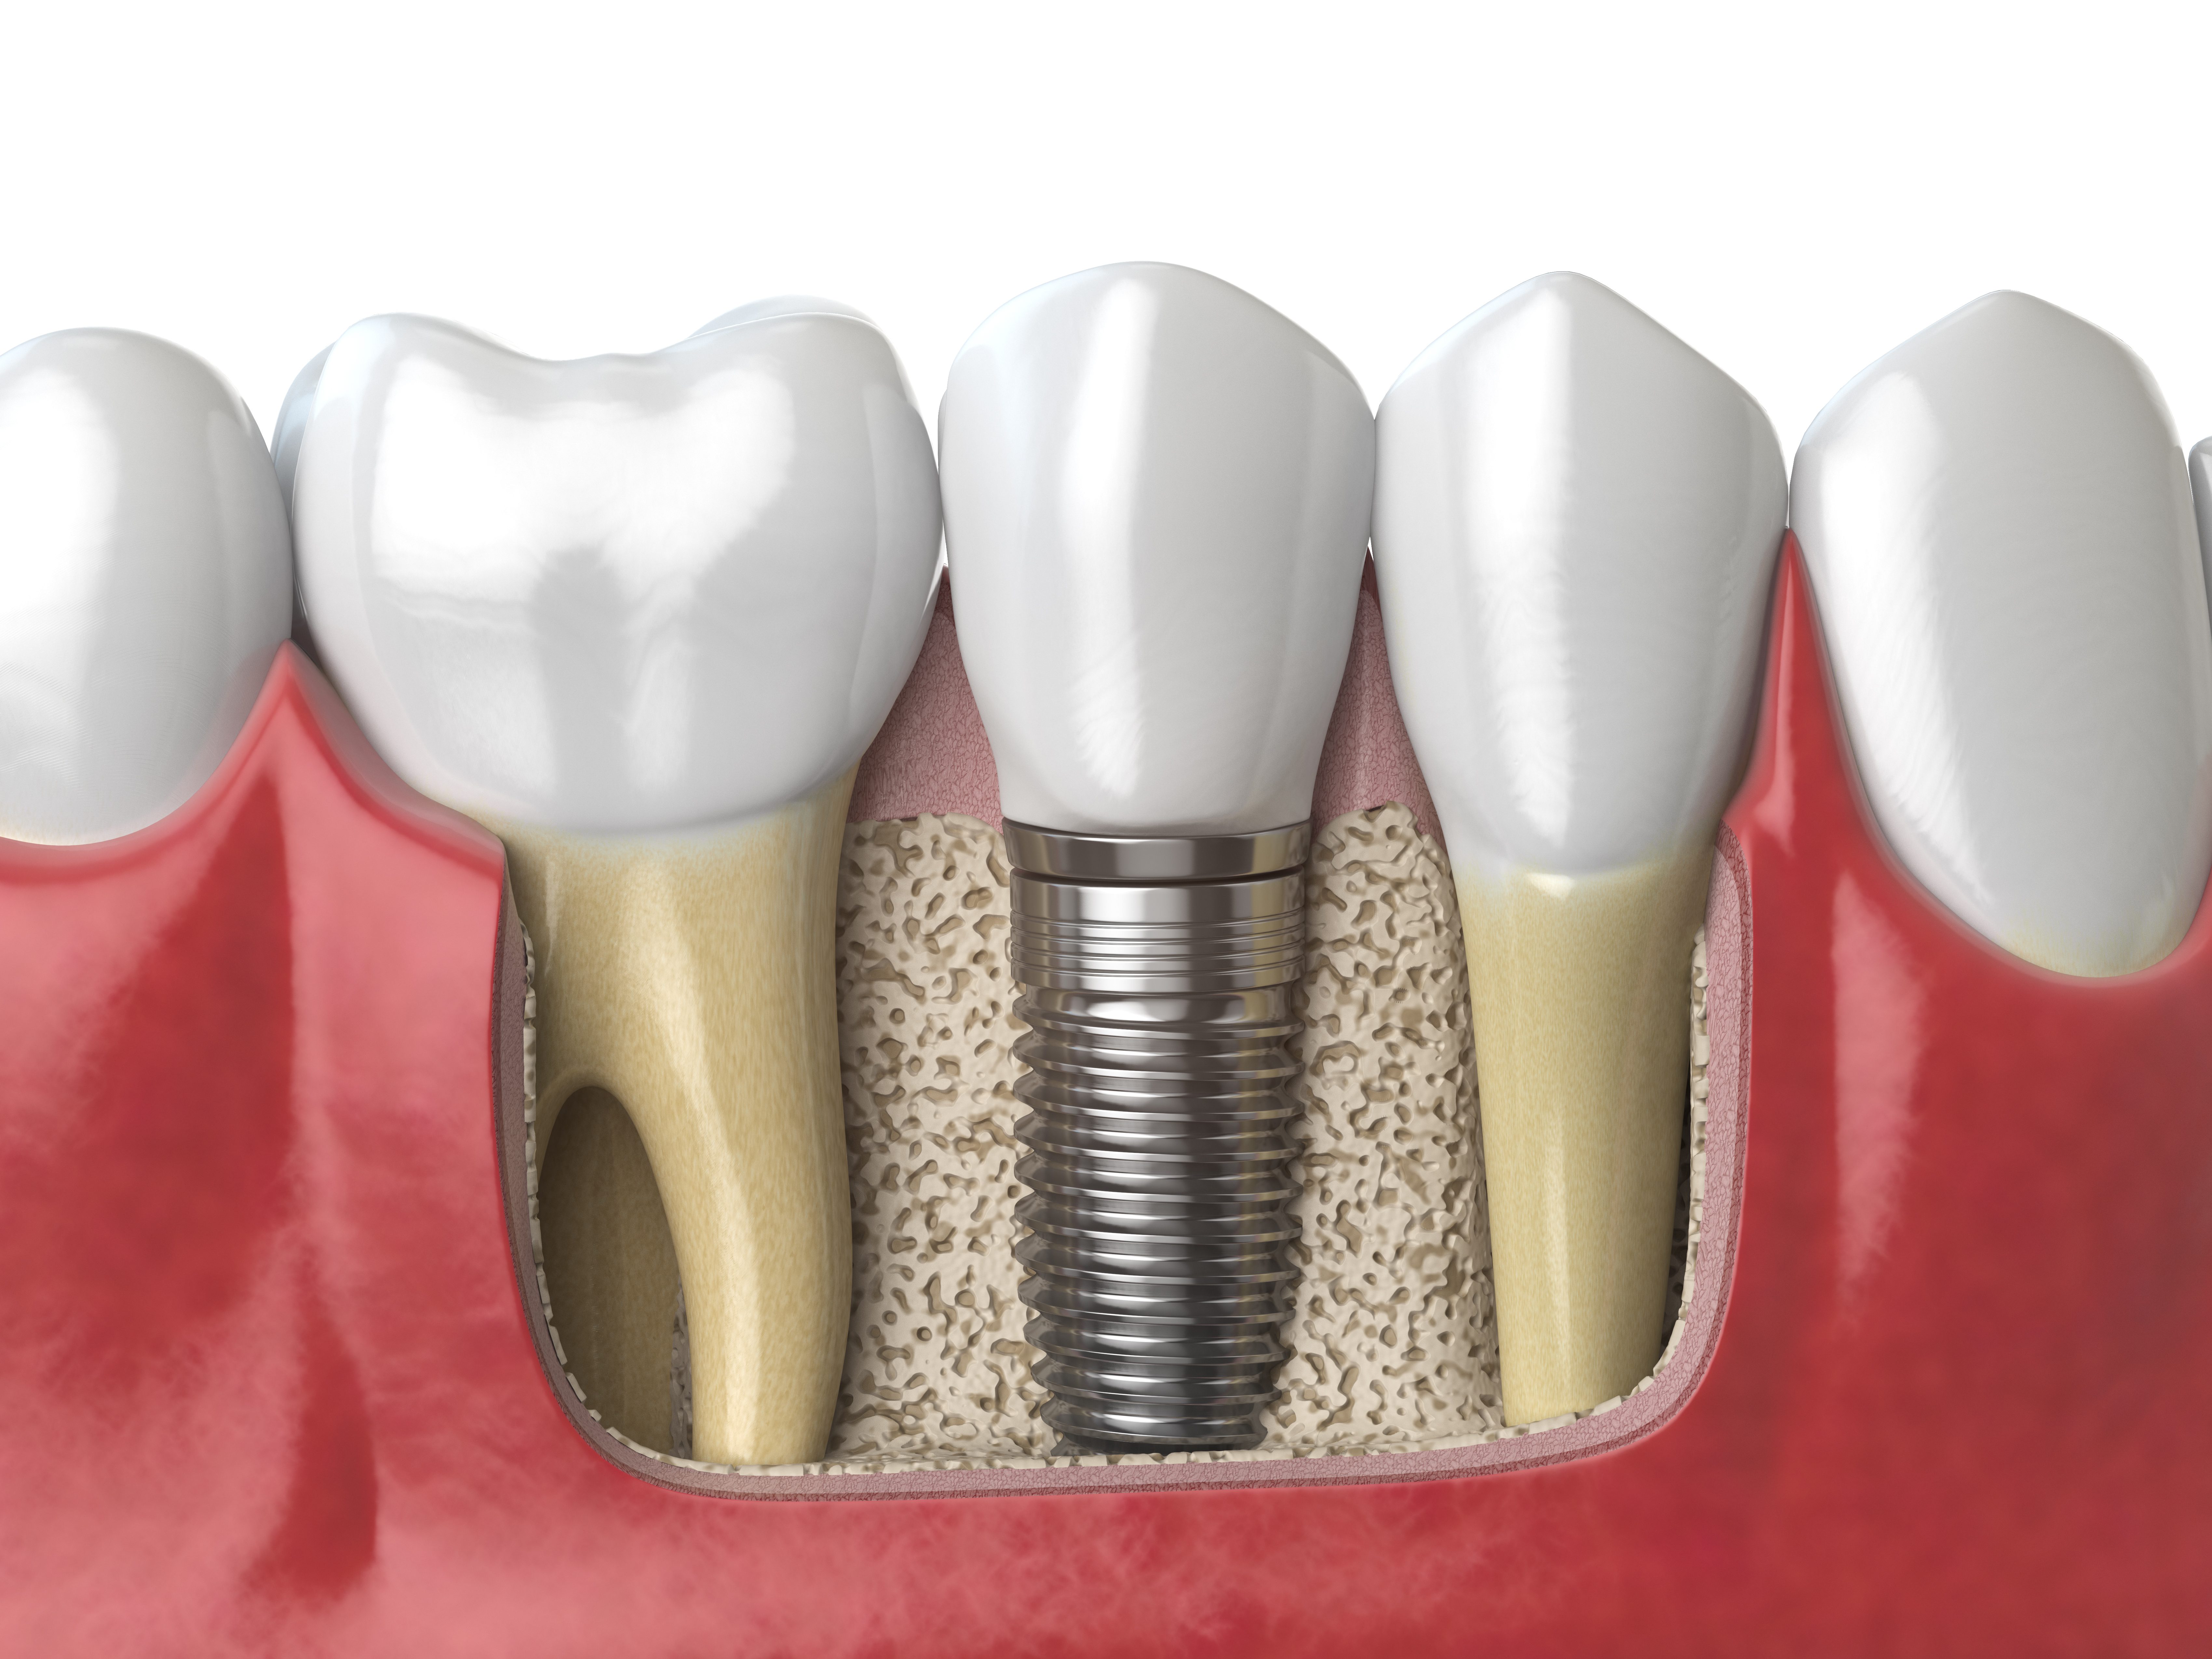 Anatomy of healthy teeth and tooth dental implant